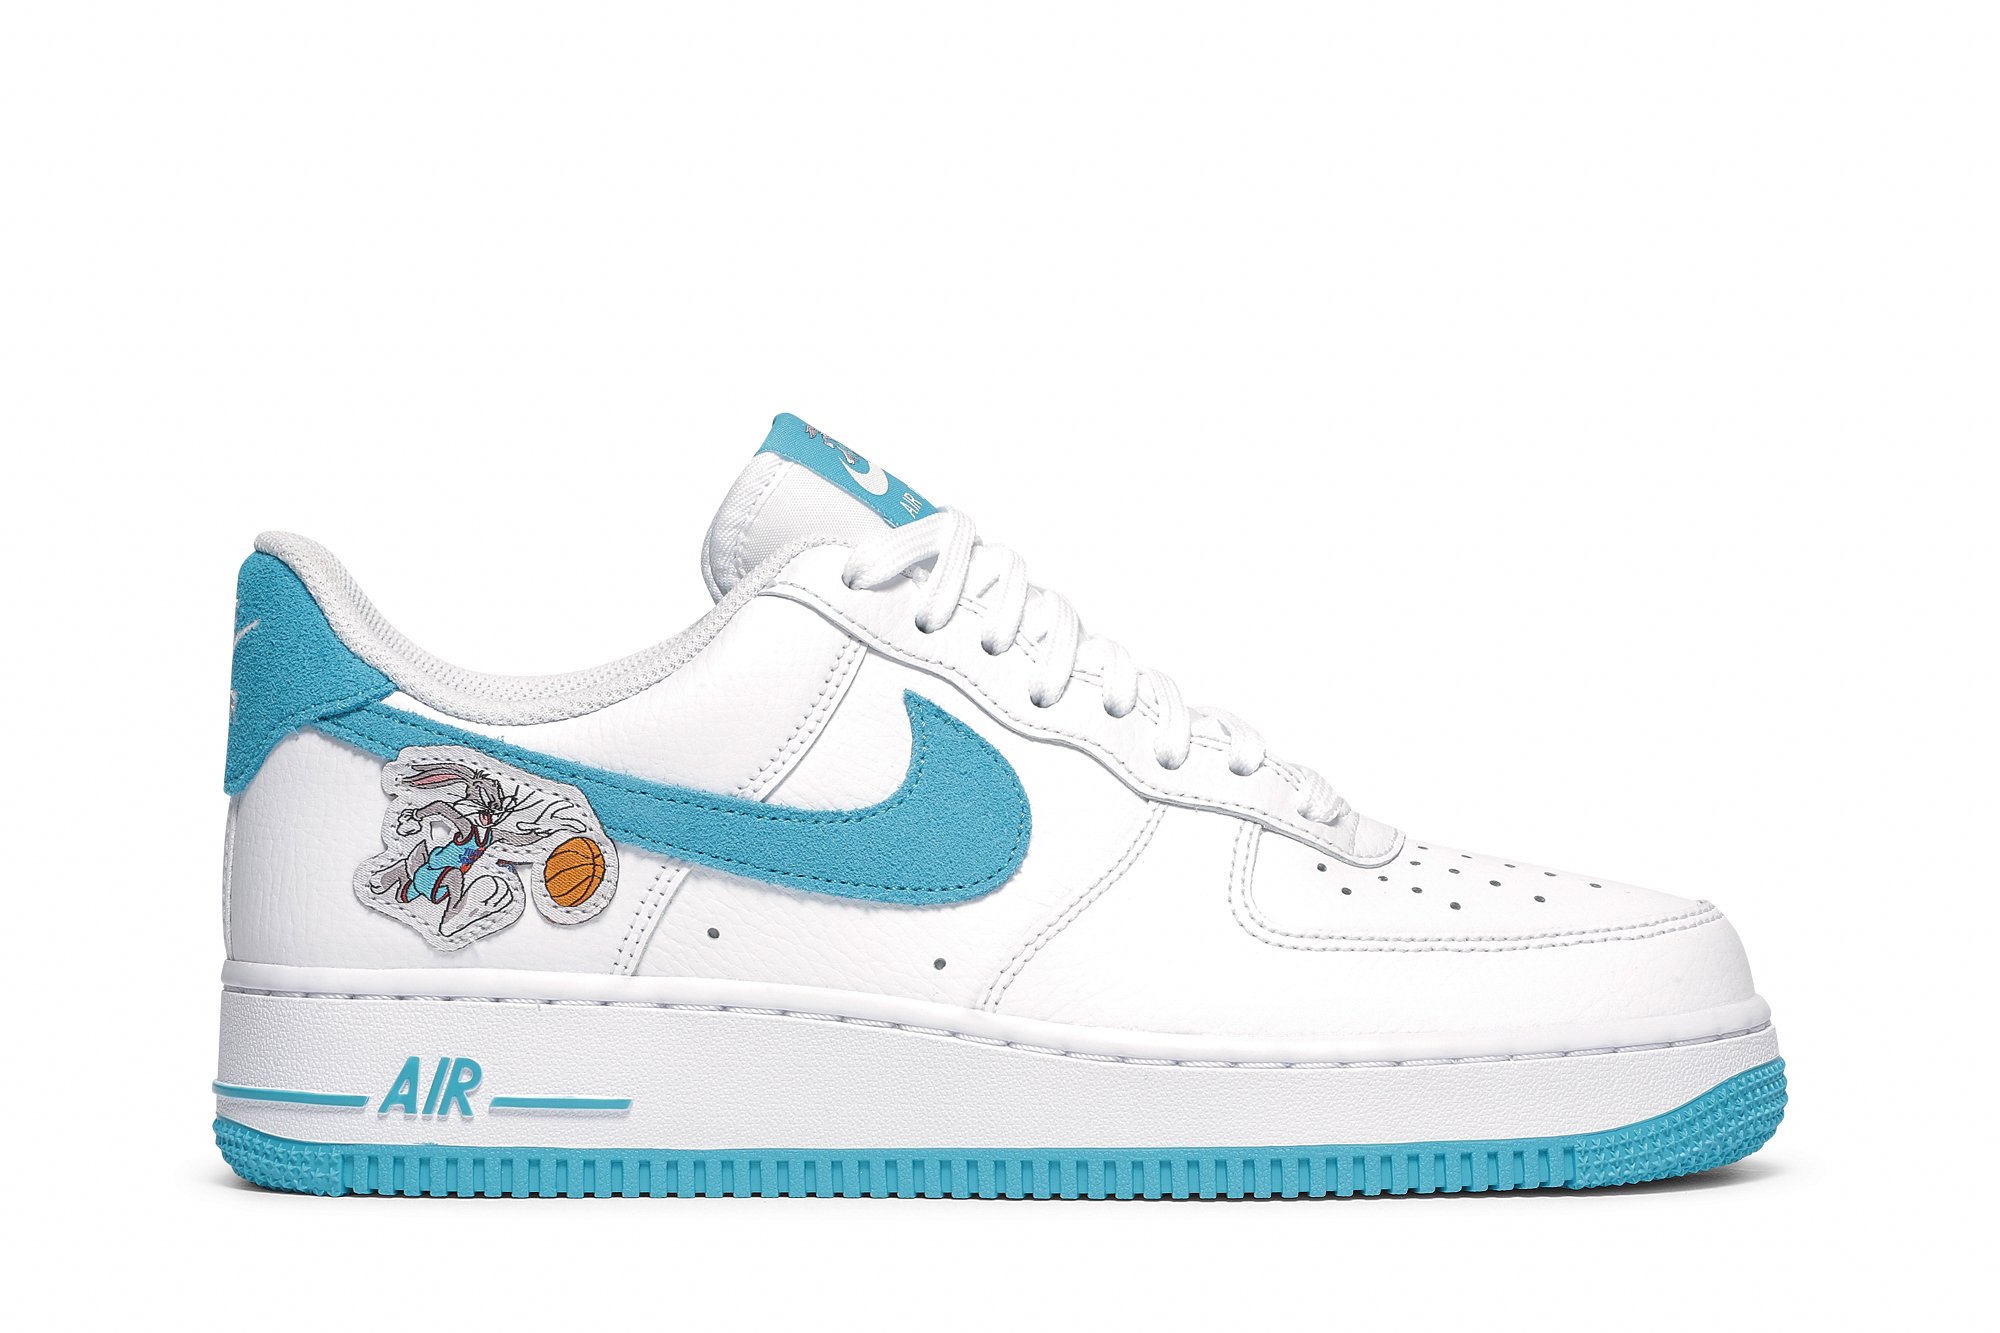 Buy Space Jam x Air Force 1 '07 Low 'Hare' - DJ7998 100 | GOAT CA